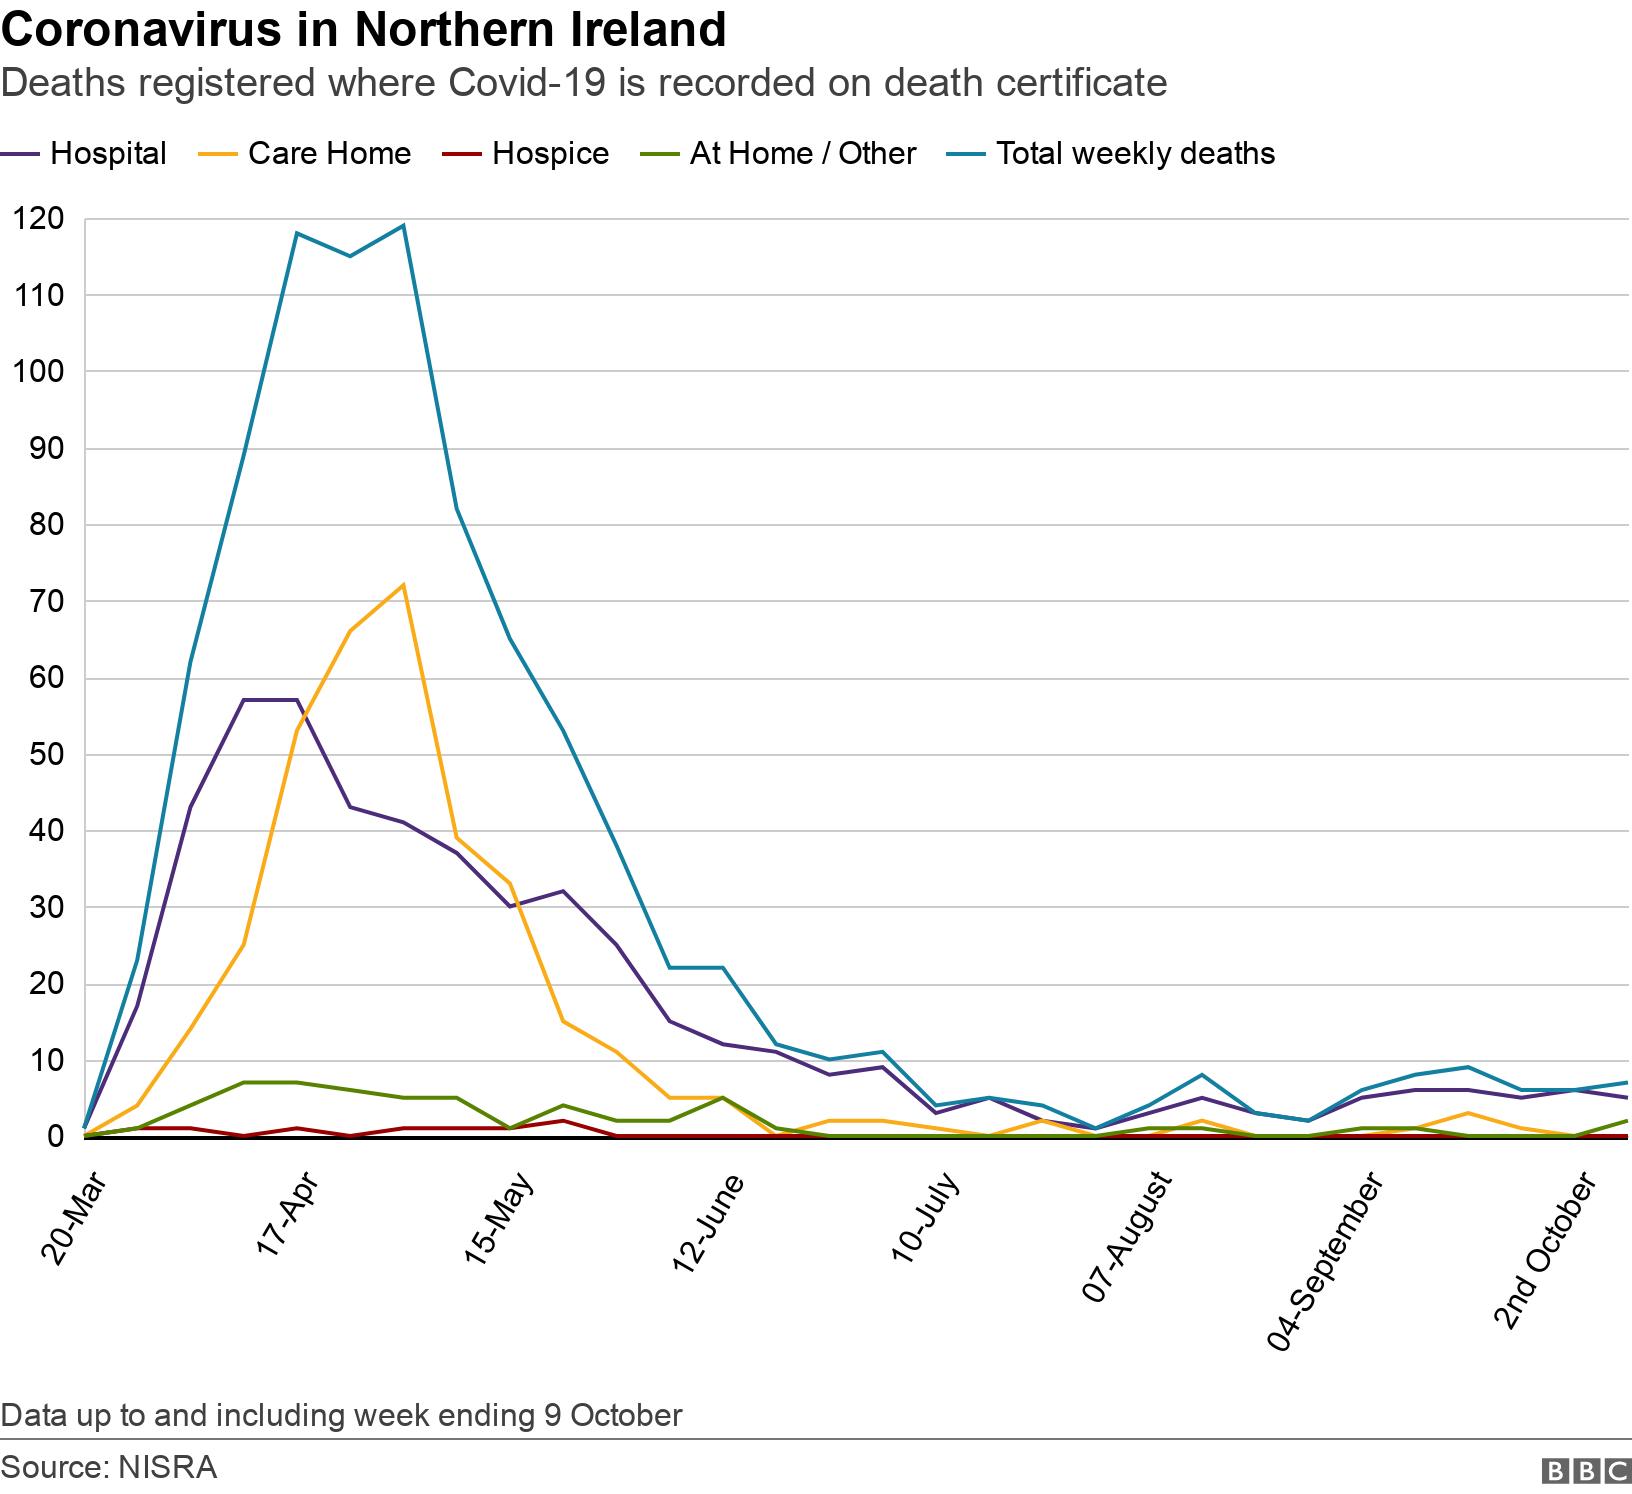 Coronavirus in Northern Ireland. Deaths registered where Covid-19 is recorded on death certificate. Graph showing place of death over time Data up to and including week ending 9 October.